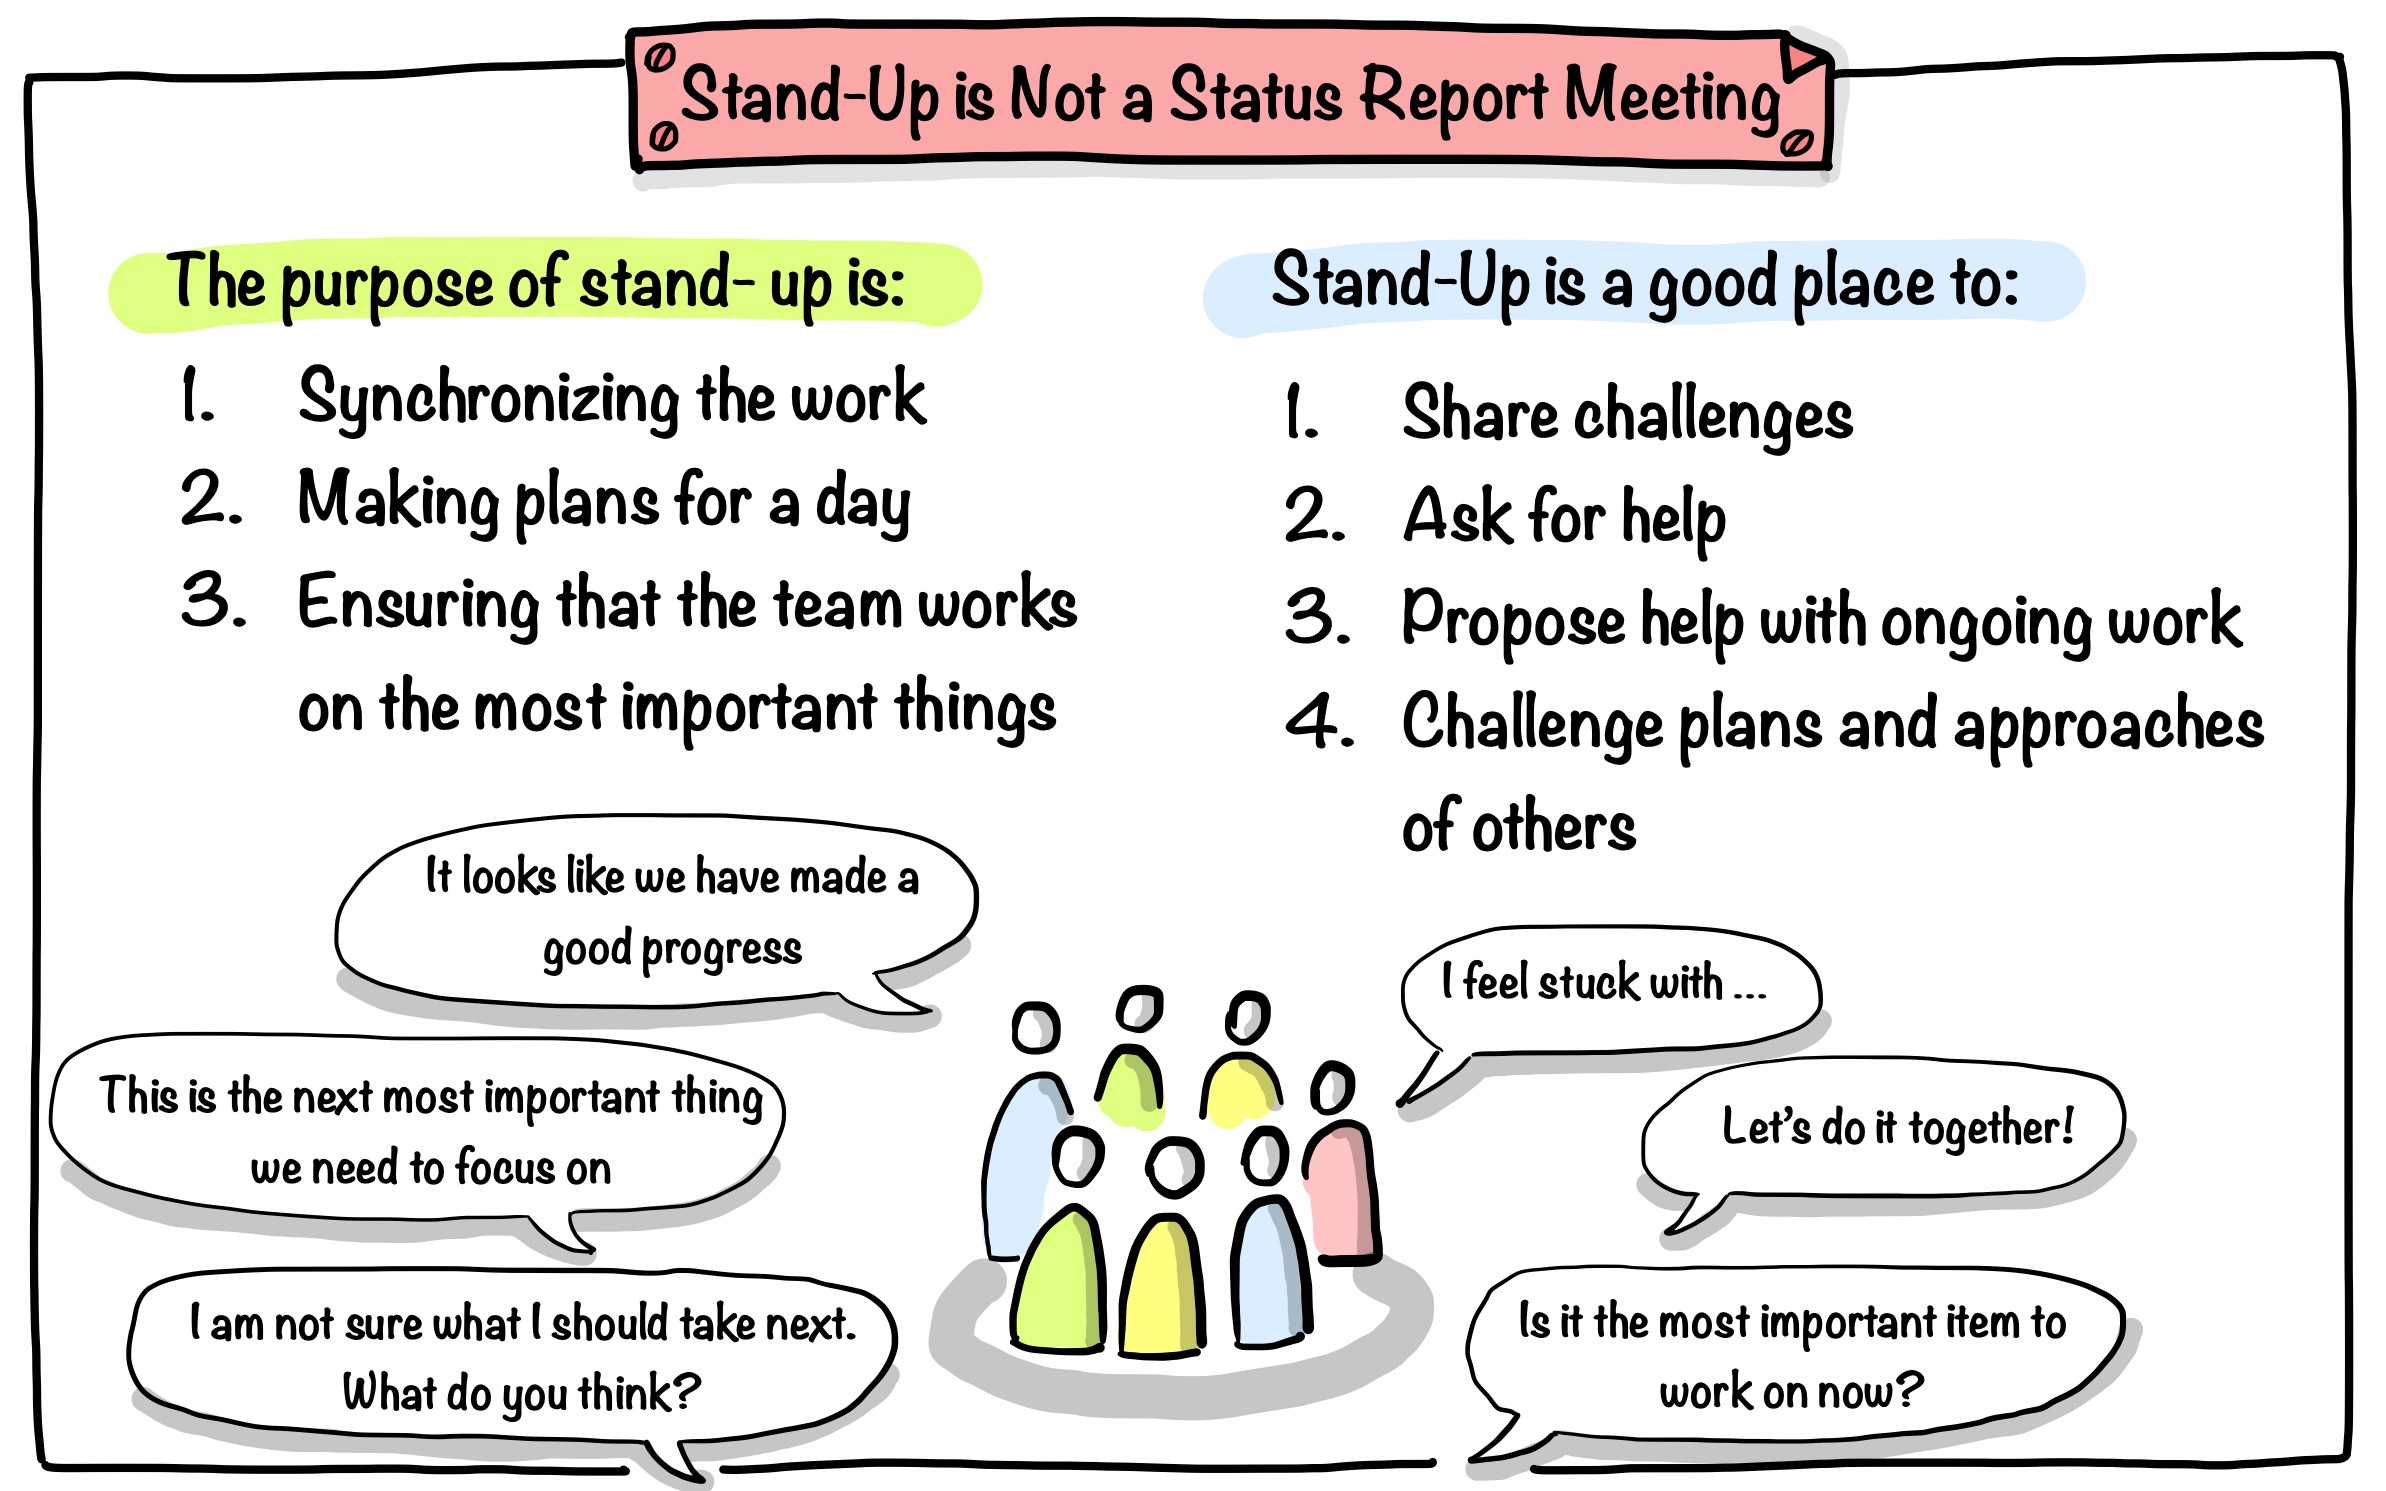 Stand-Up is Not a Status Report Meeting